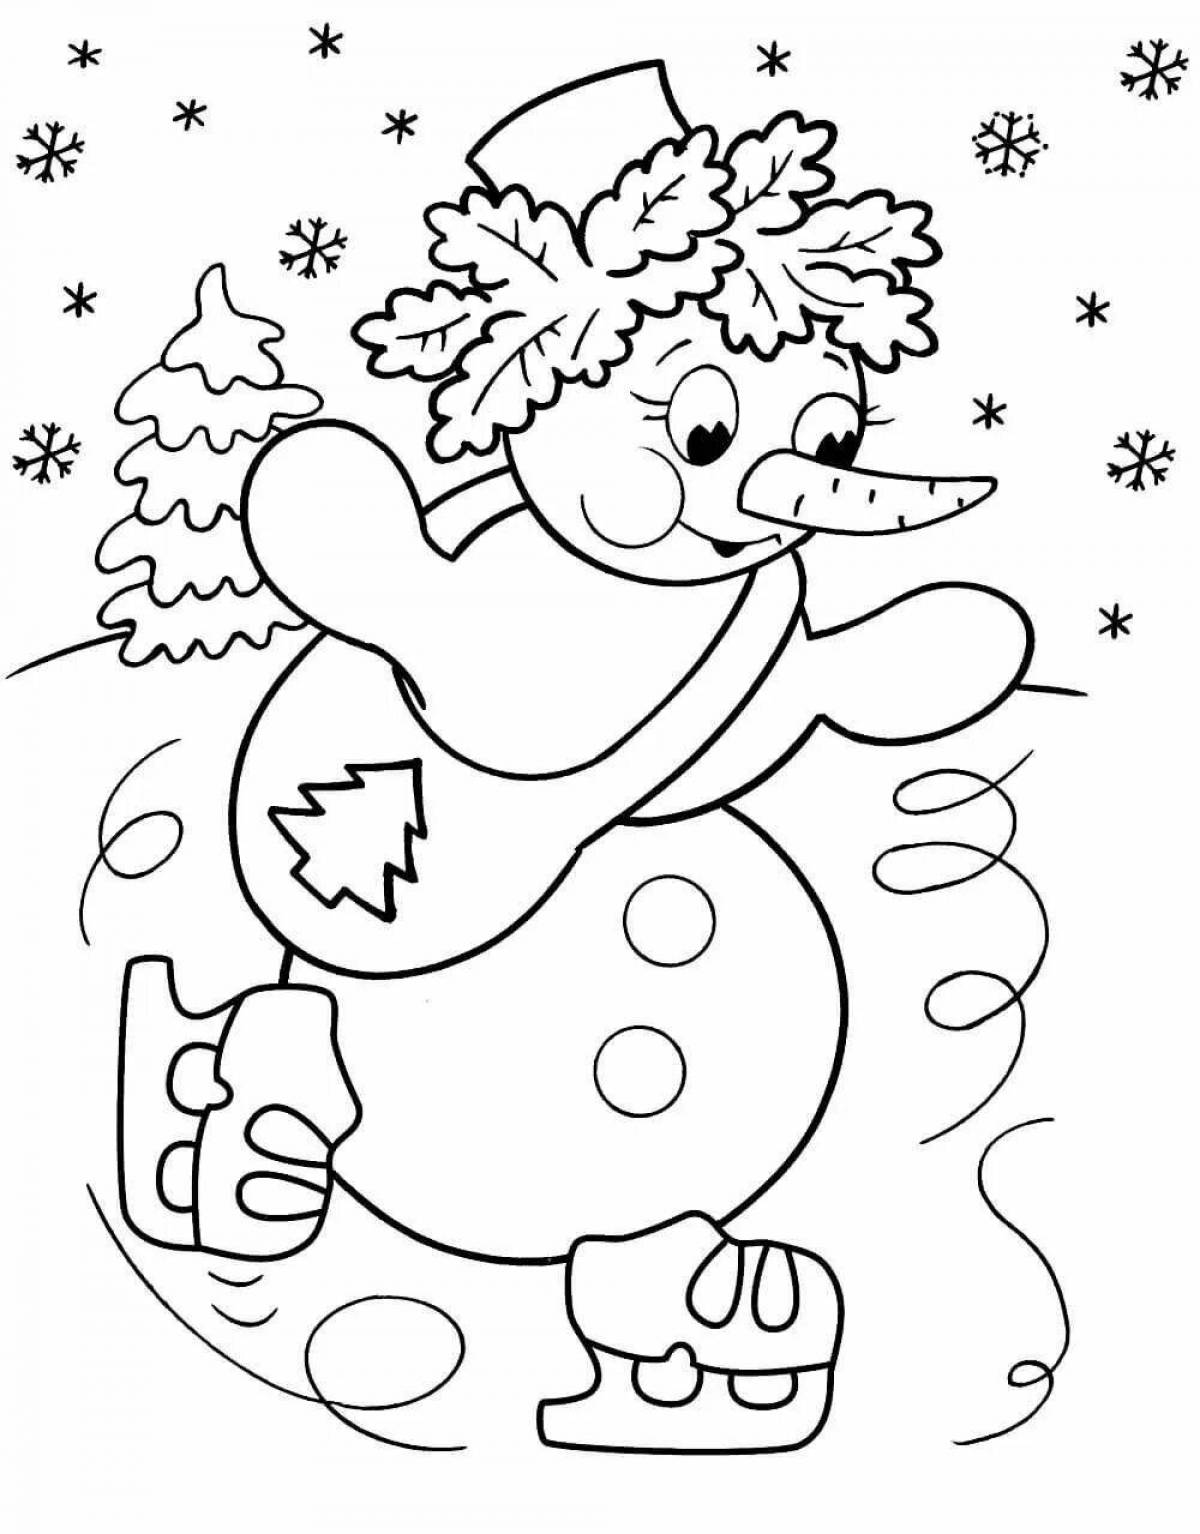 Fascinating coloring book snowman on skates for kids